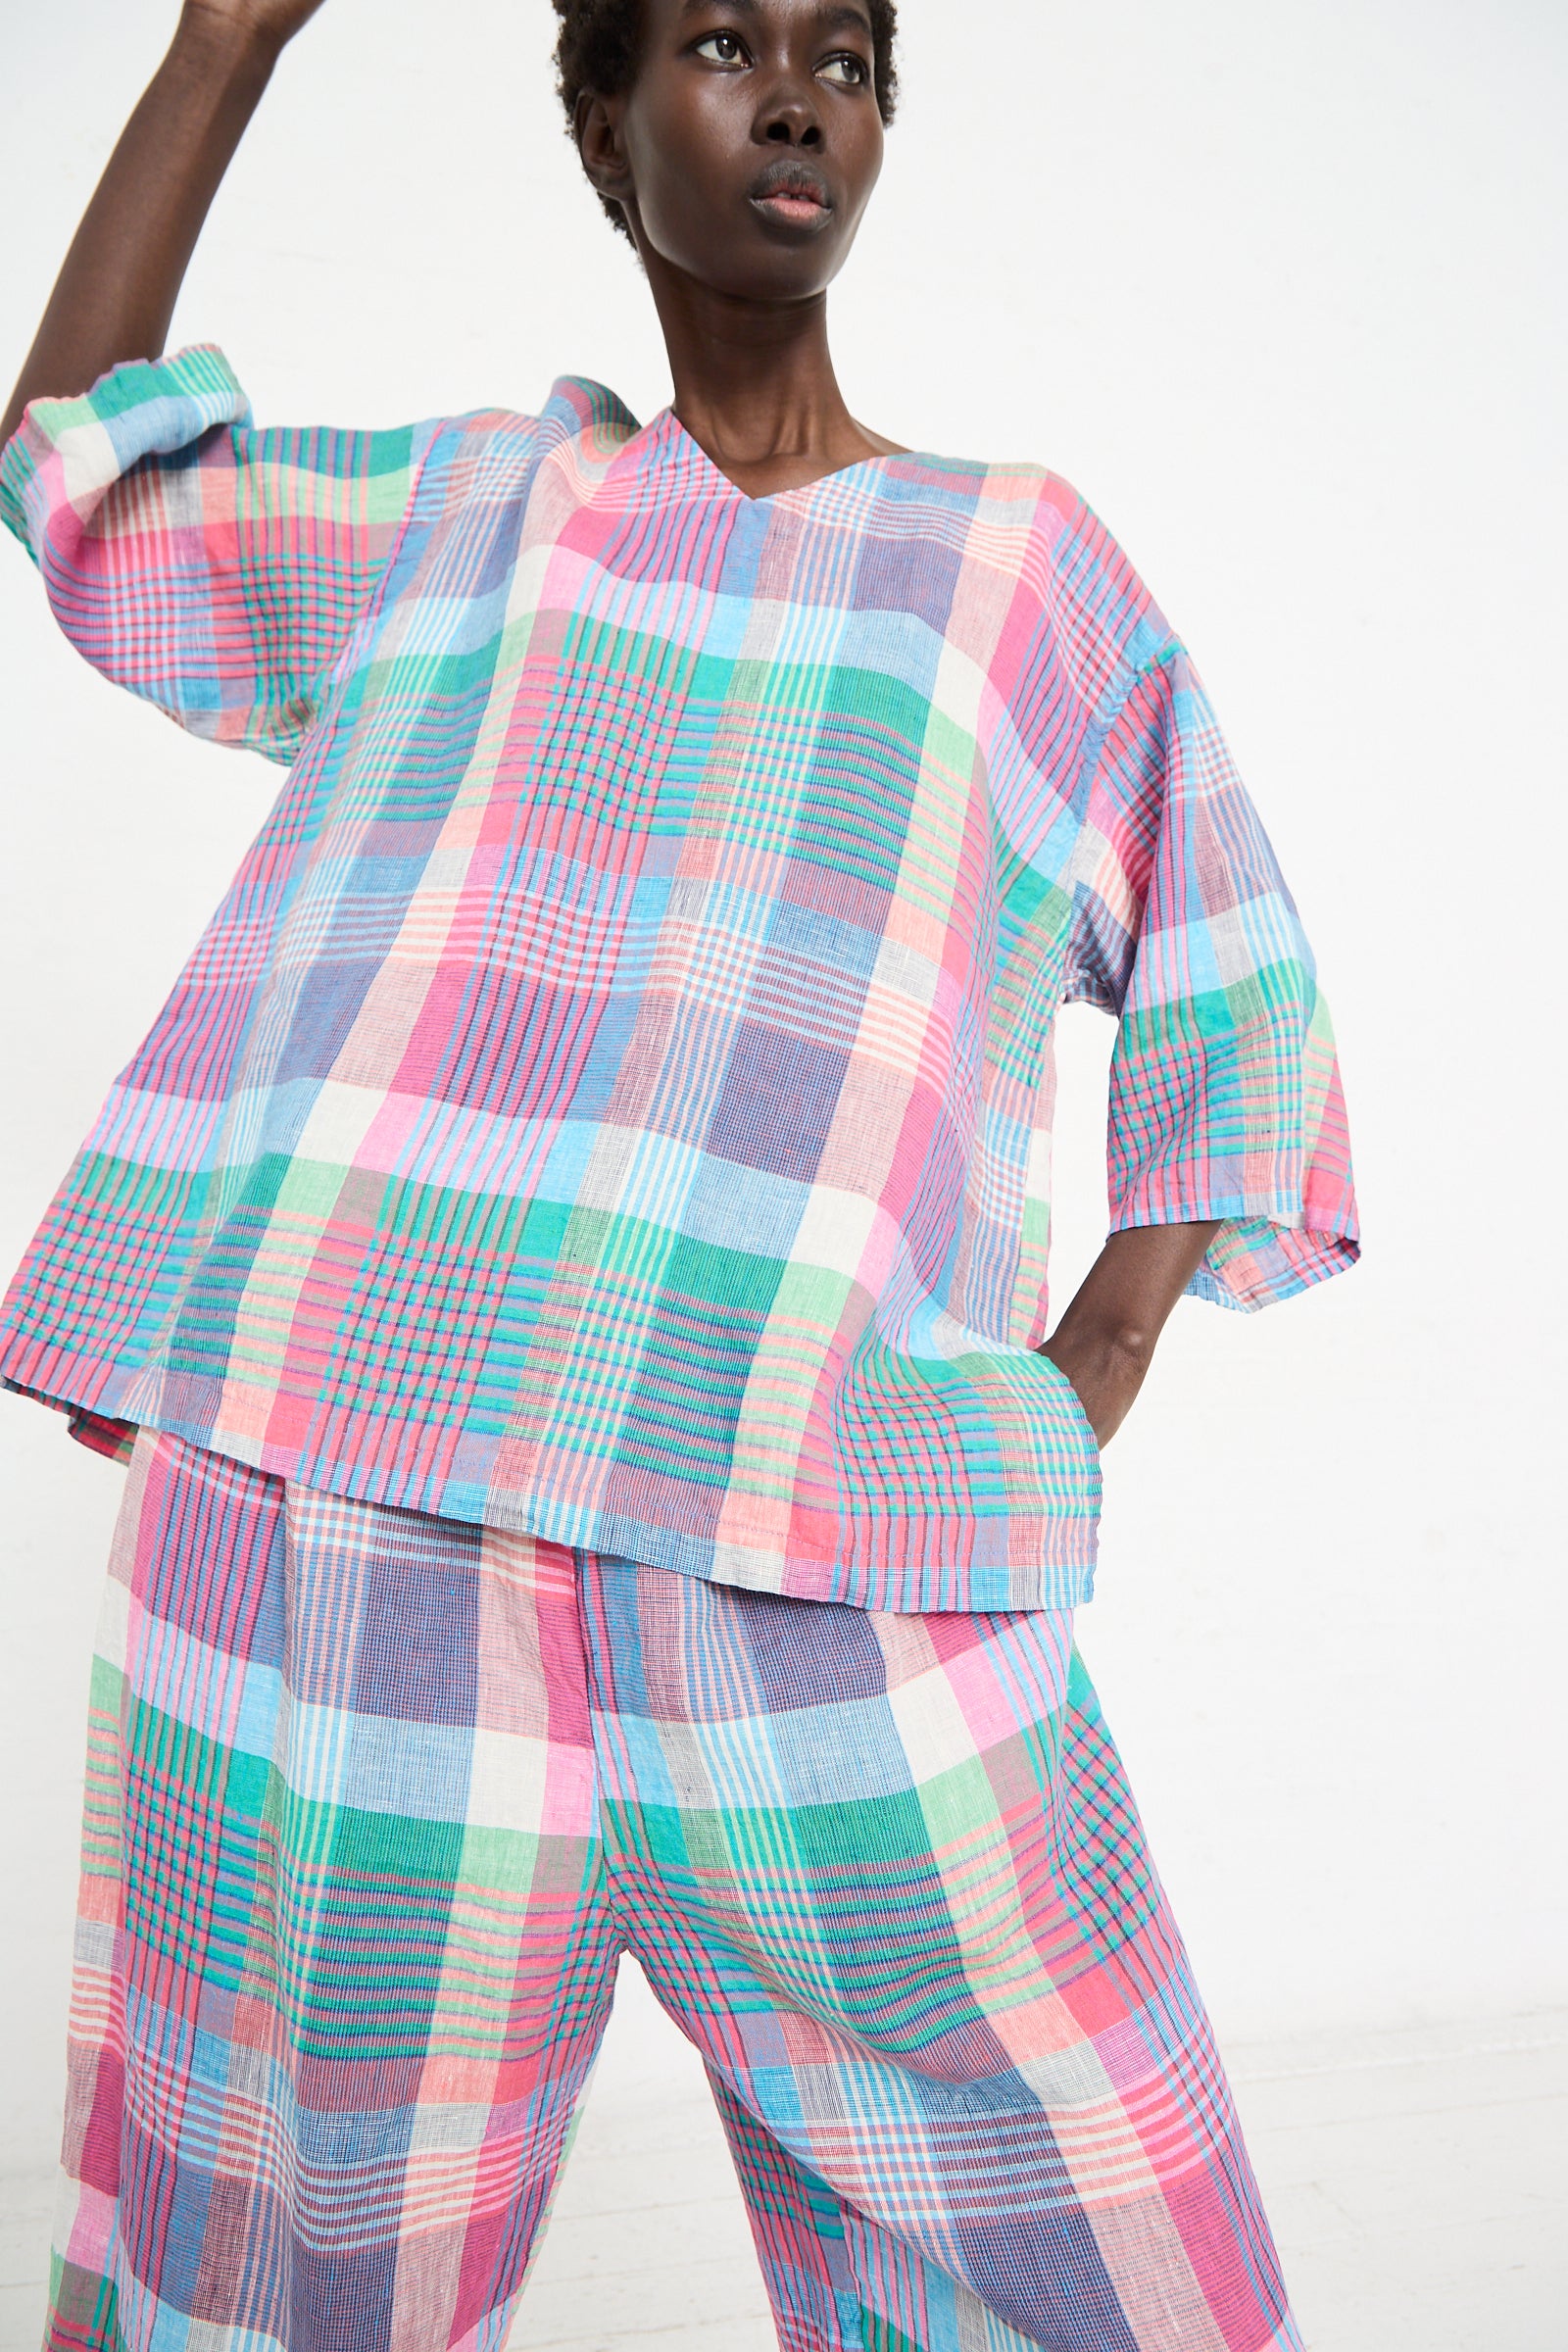 nest Robe: Timeless Japanese Clothing Crafted with Quality Linens – Oroboro  Store